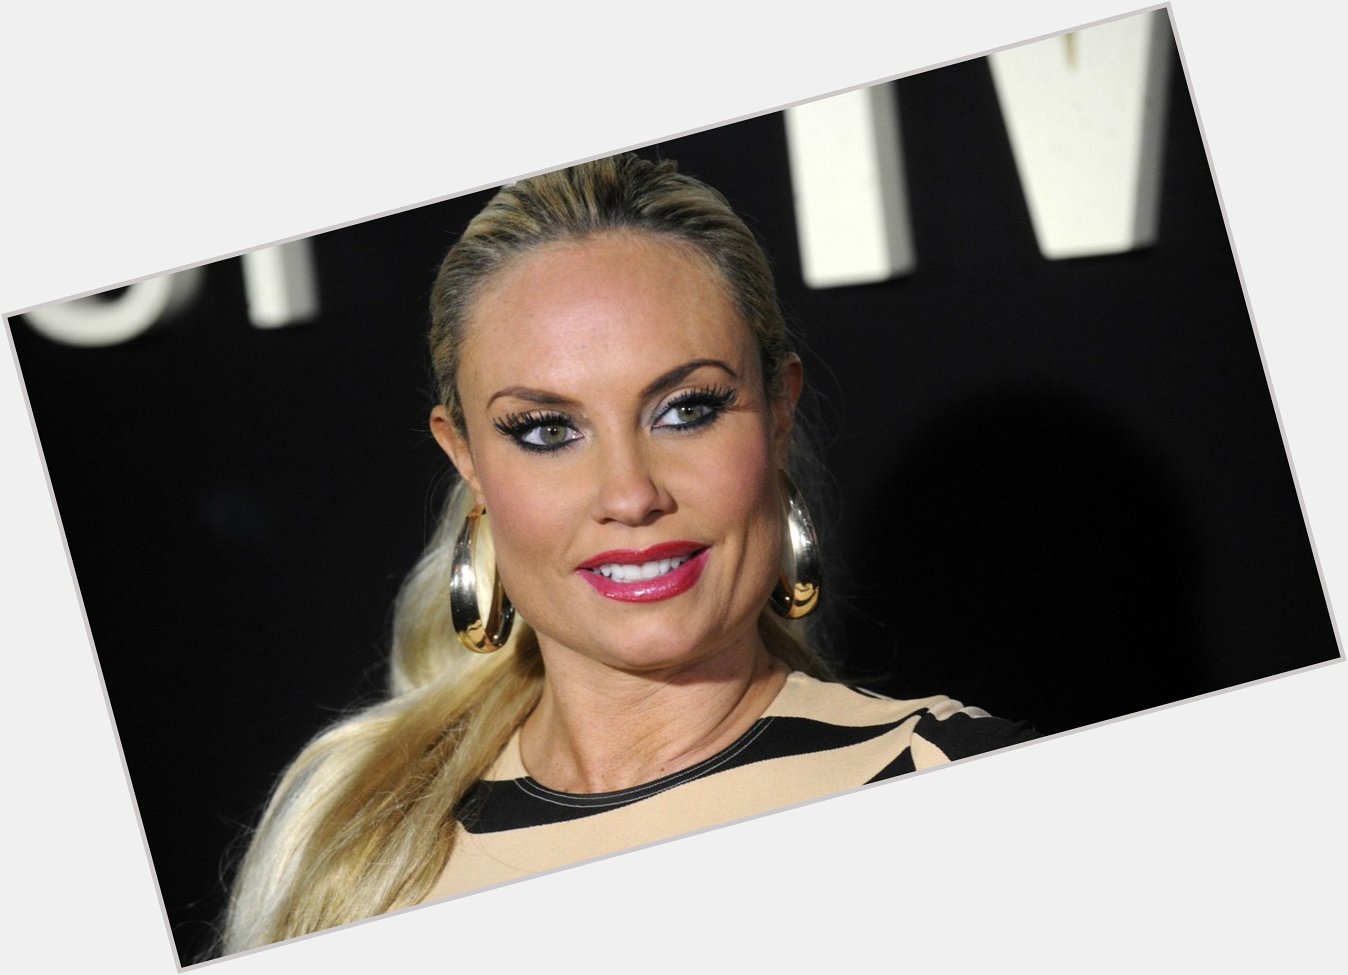  ON WITH Wishes:
Coco Austin A Happy Birthday! 